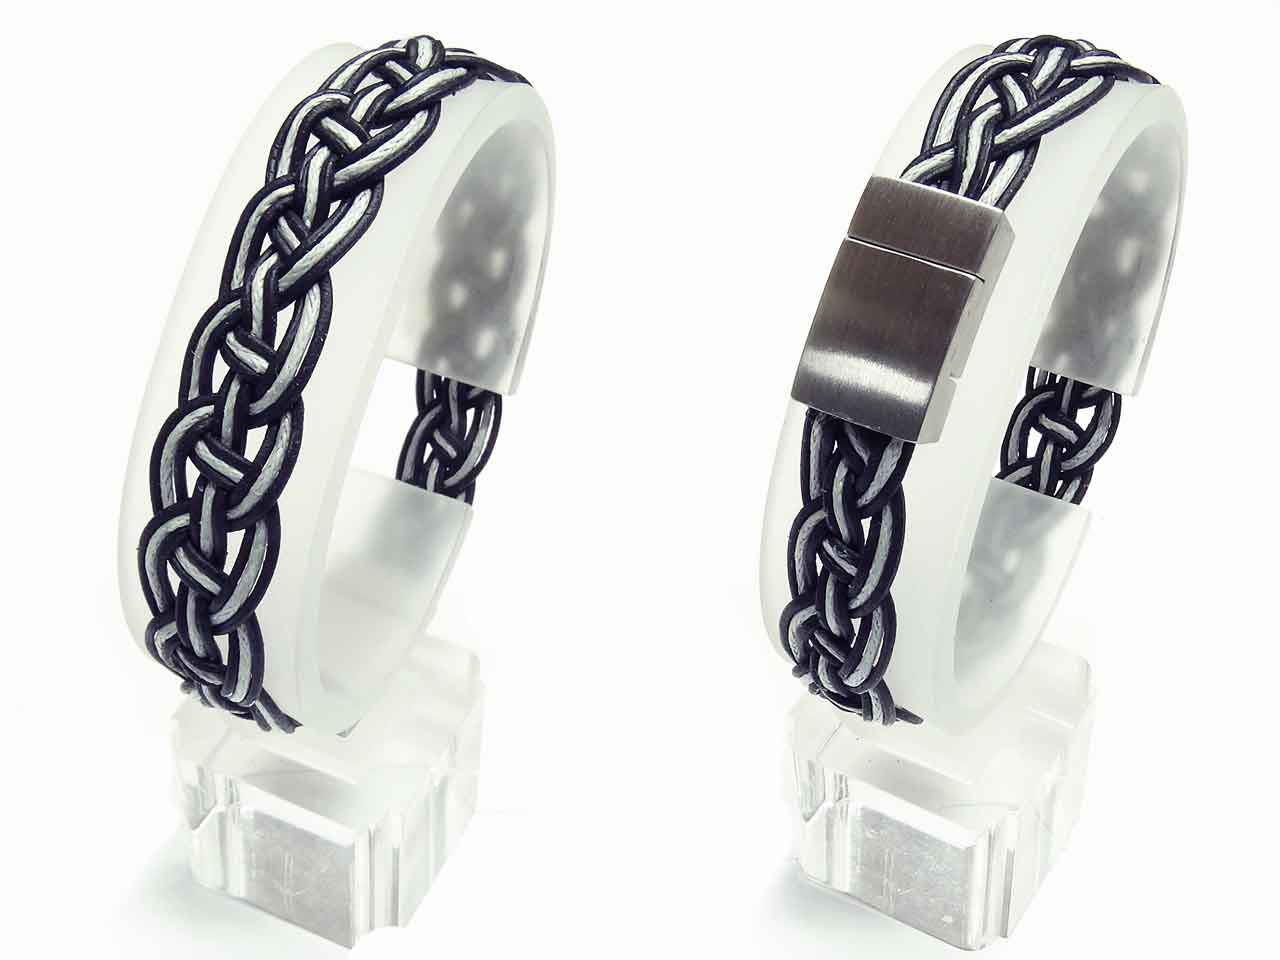 Instruction Braided bracelets in celtic style - pic 11